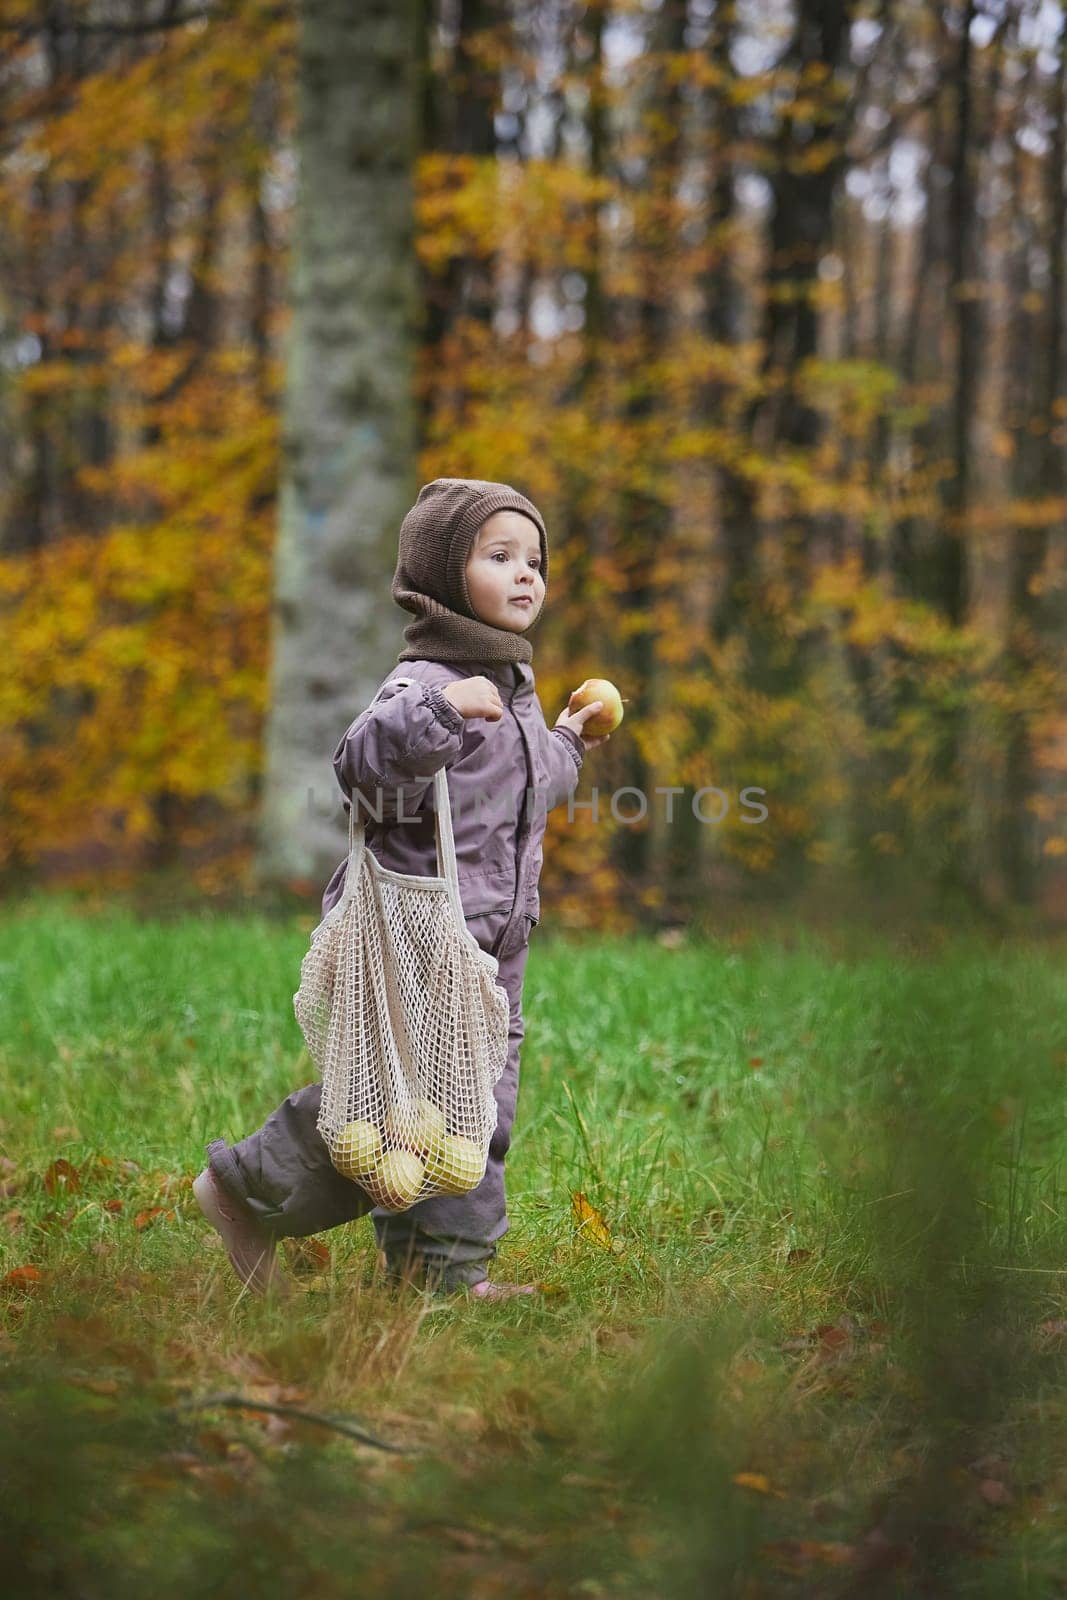 Beautiful child in the forest in Denmark by Viktor_Osypenko